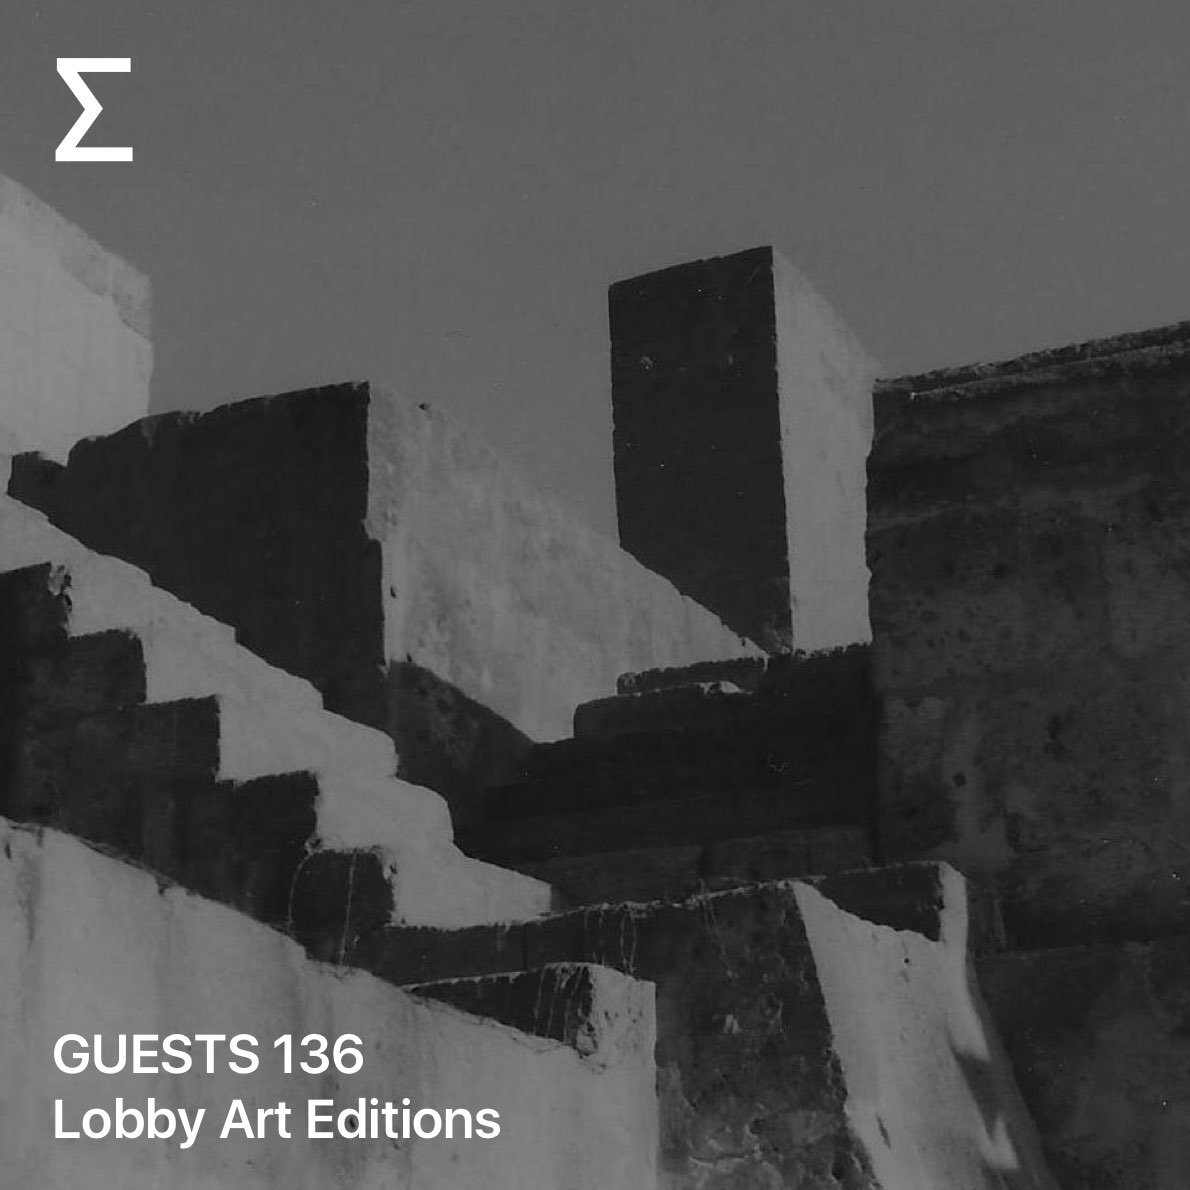 GUESTS 136 – Lobby Art Editions